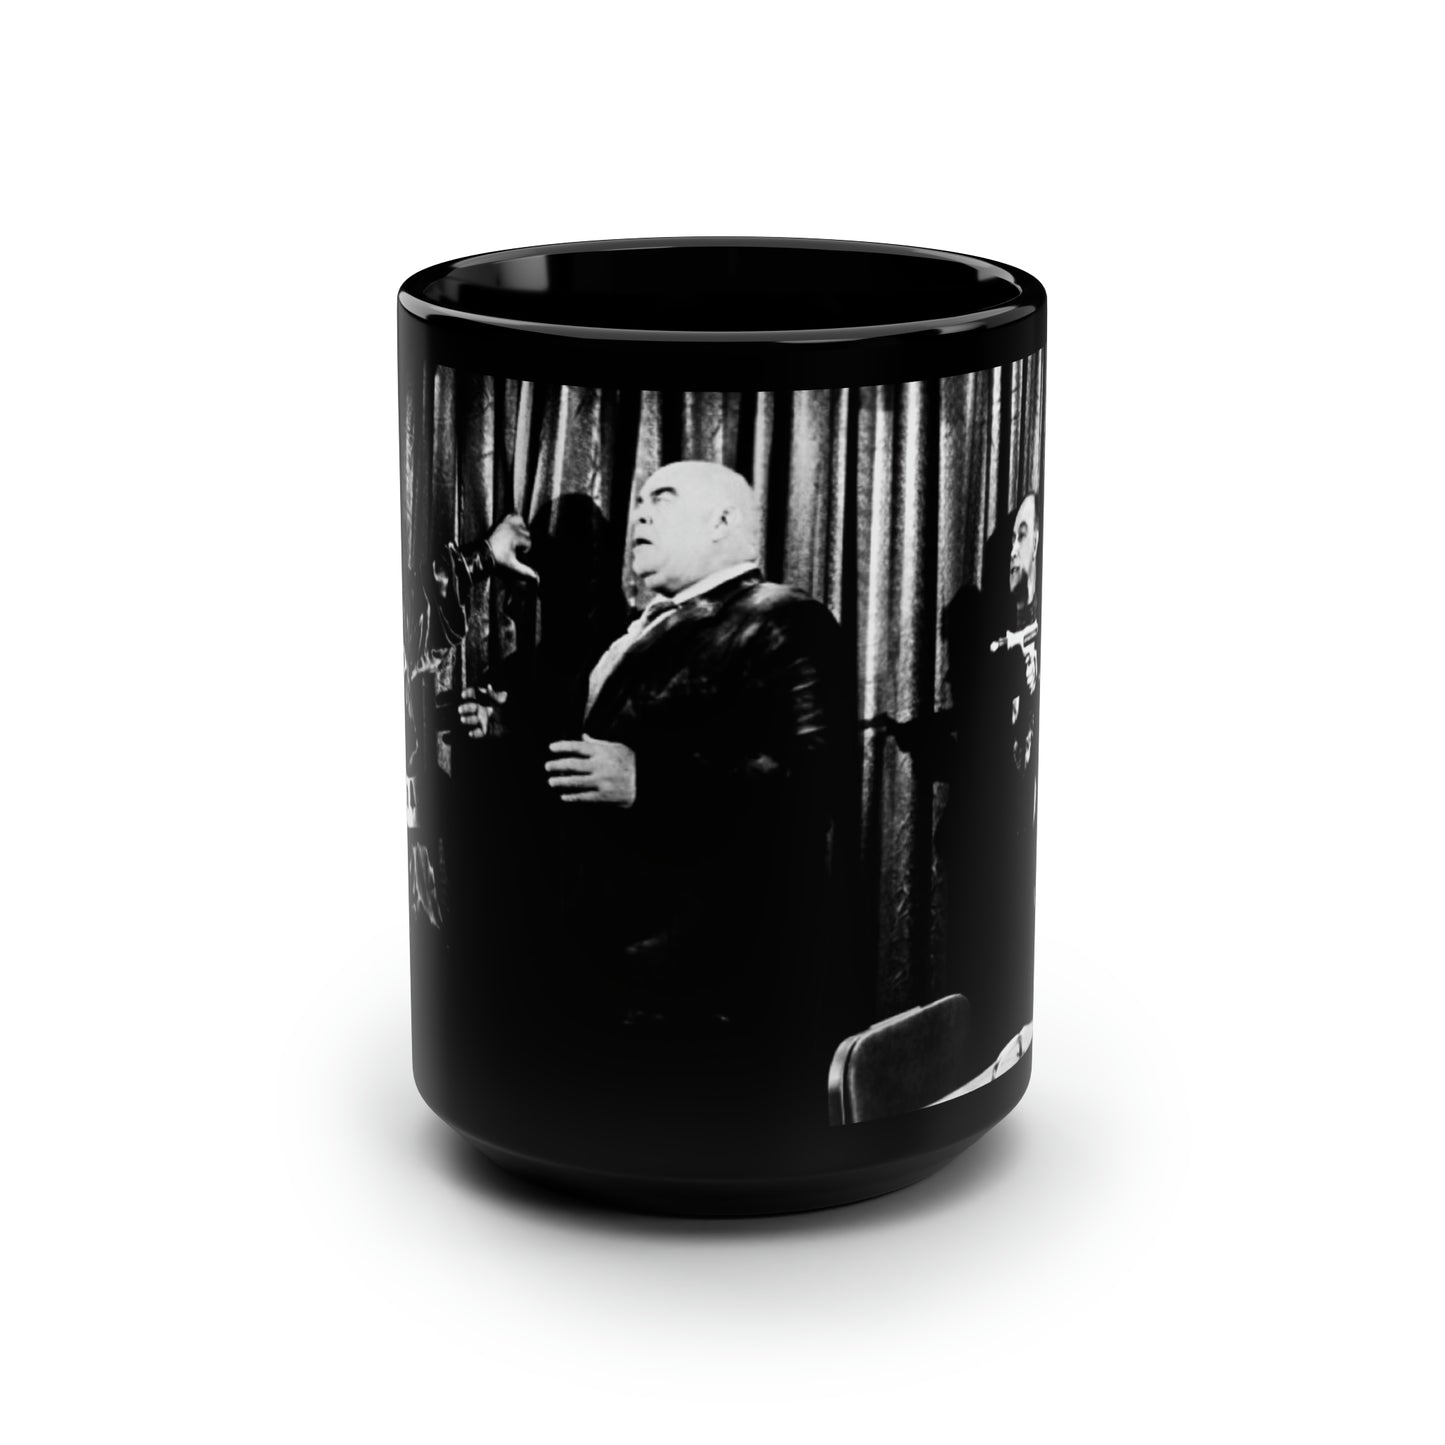 Plan 9 From Outer Space - Classic TV & Film - Black Mug, 15oz